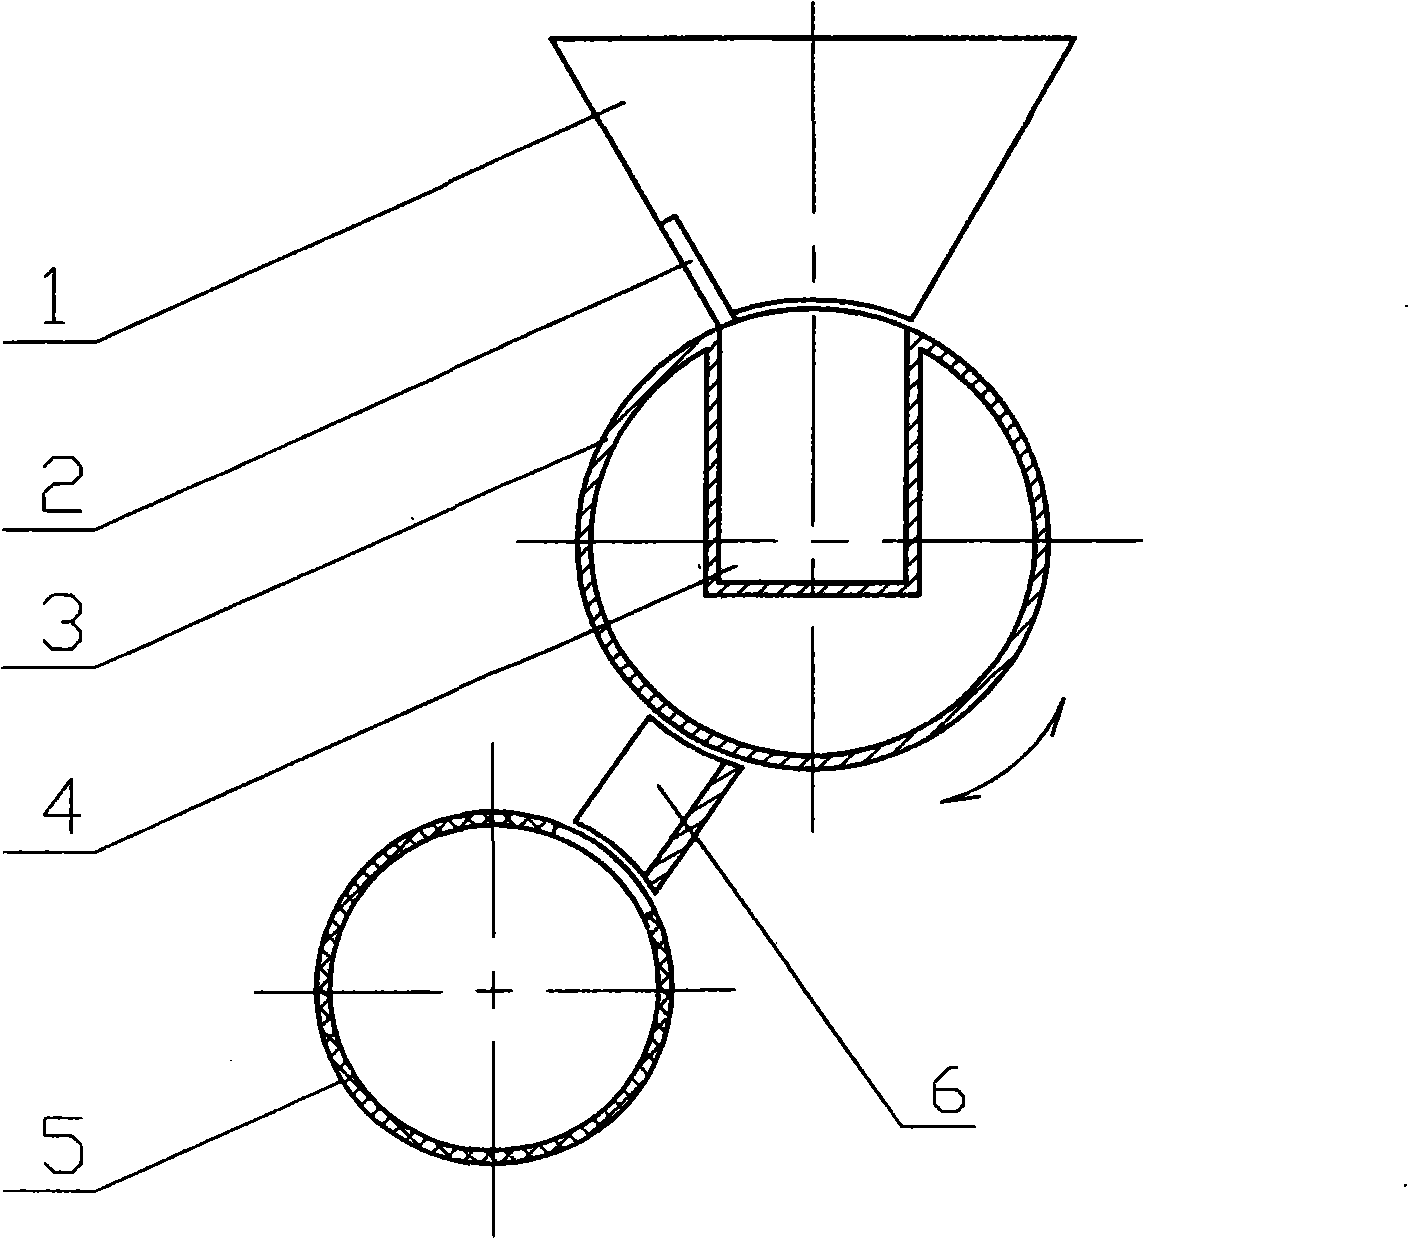 Scallop seed automatic allocation cage loading device